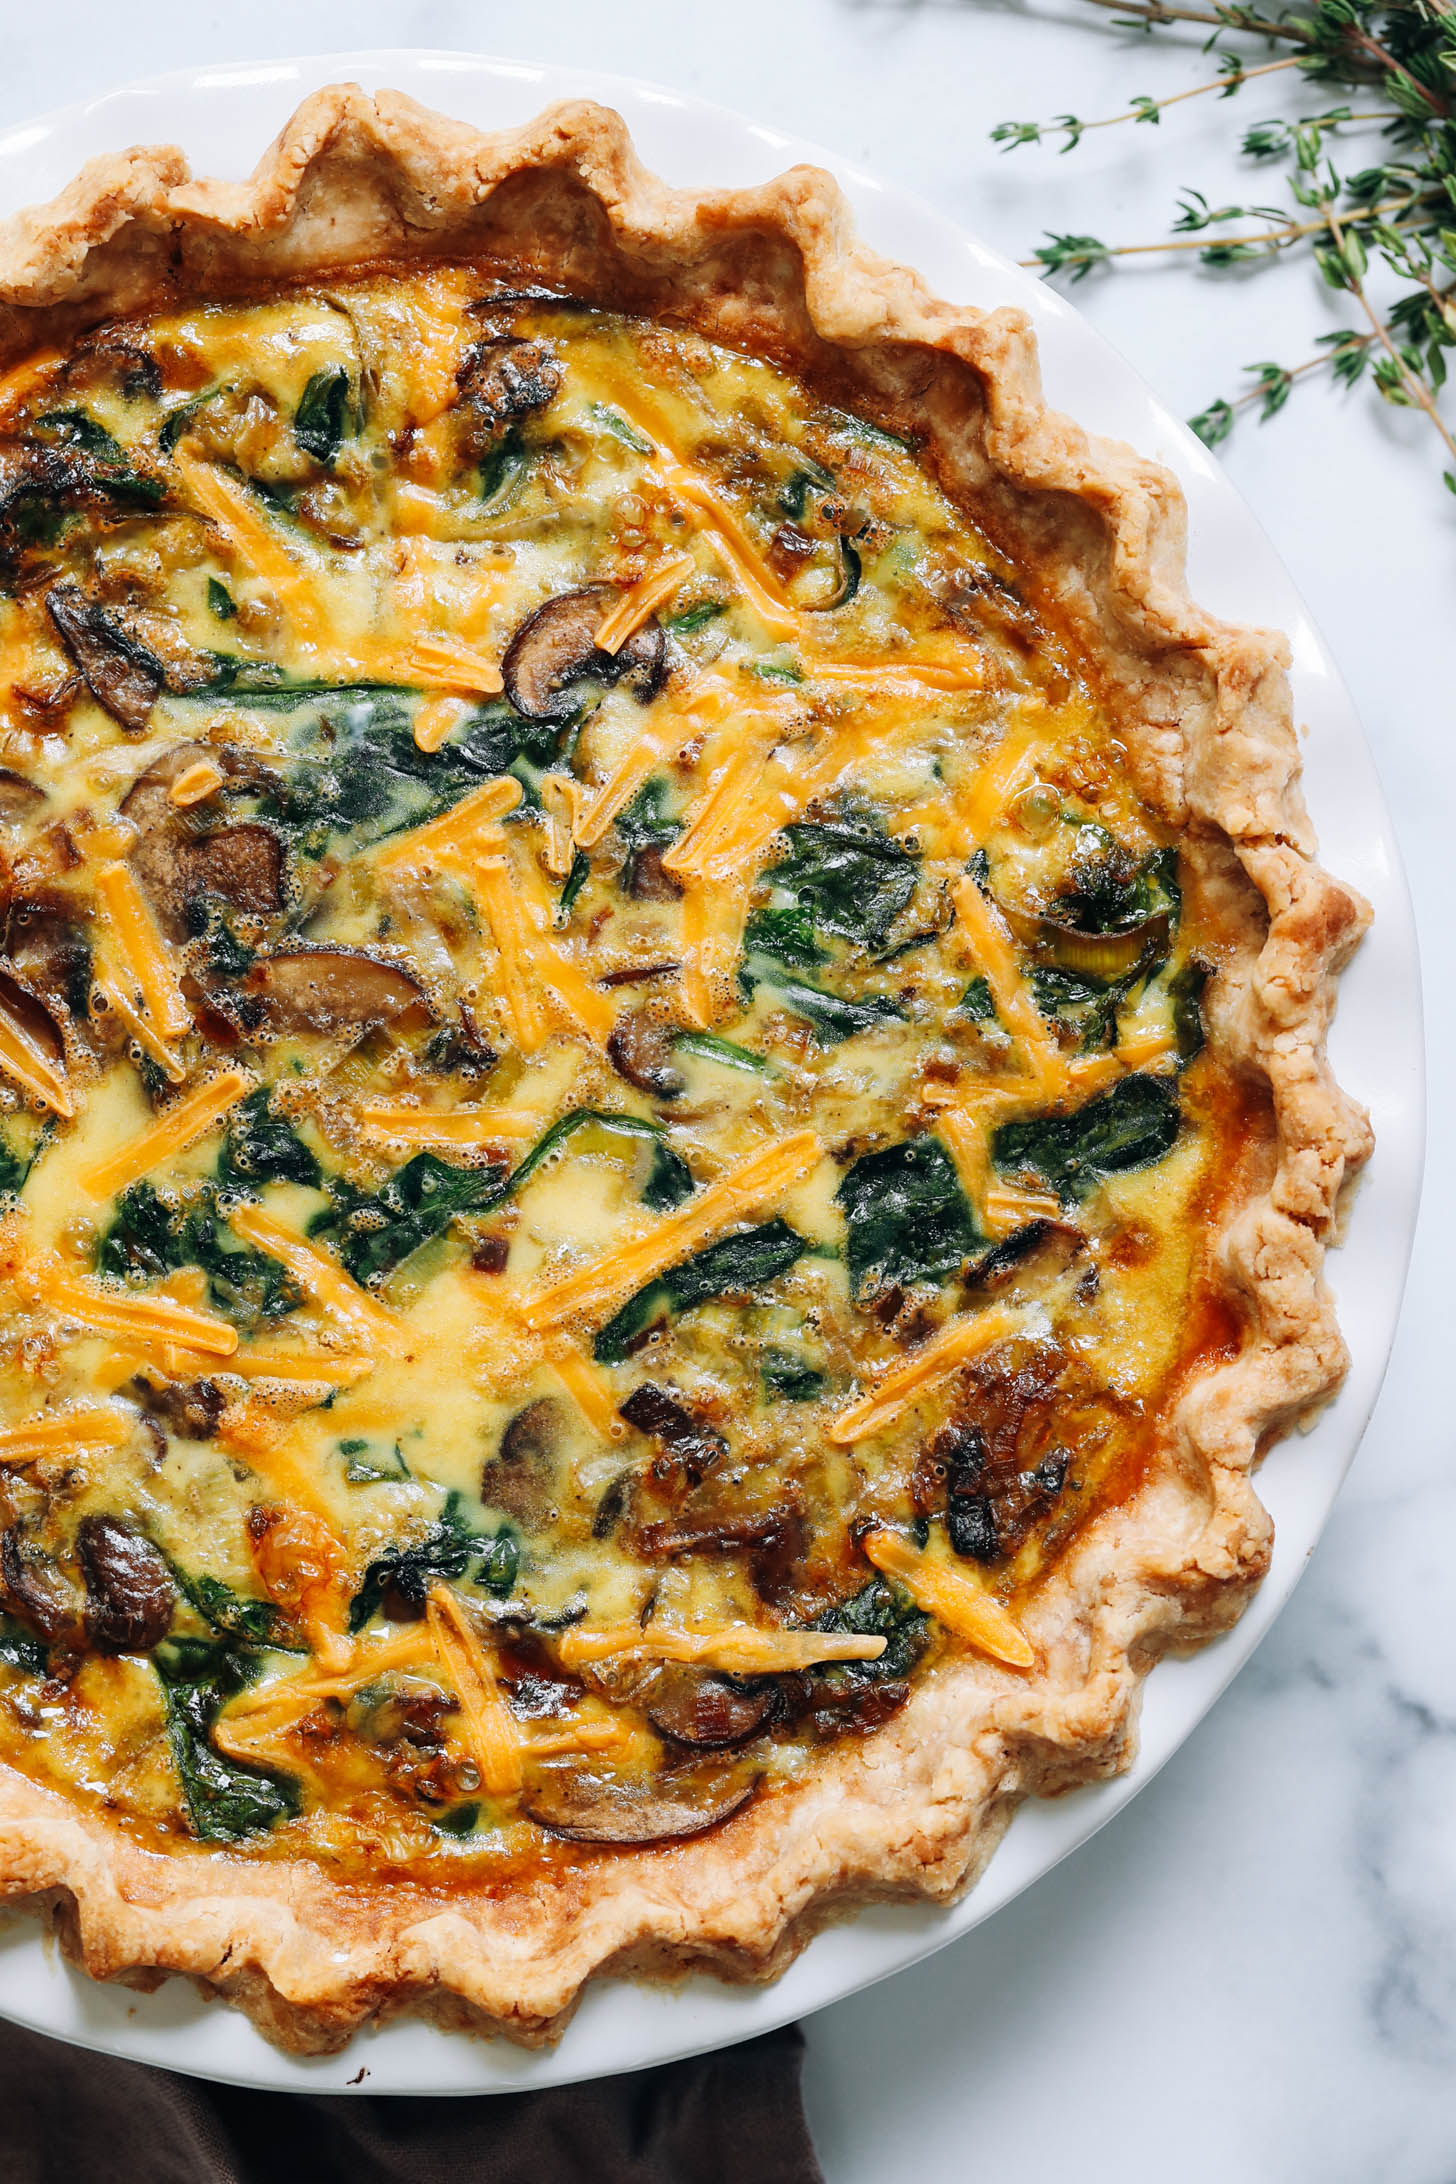 Overhead shot of a freshly baked gluten-free quiche with mushrooms, leeks, and spinach